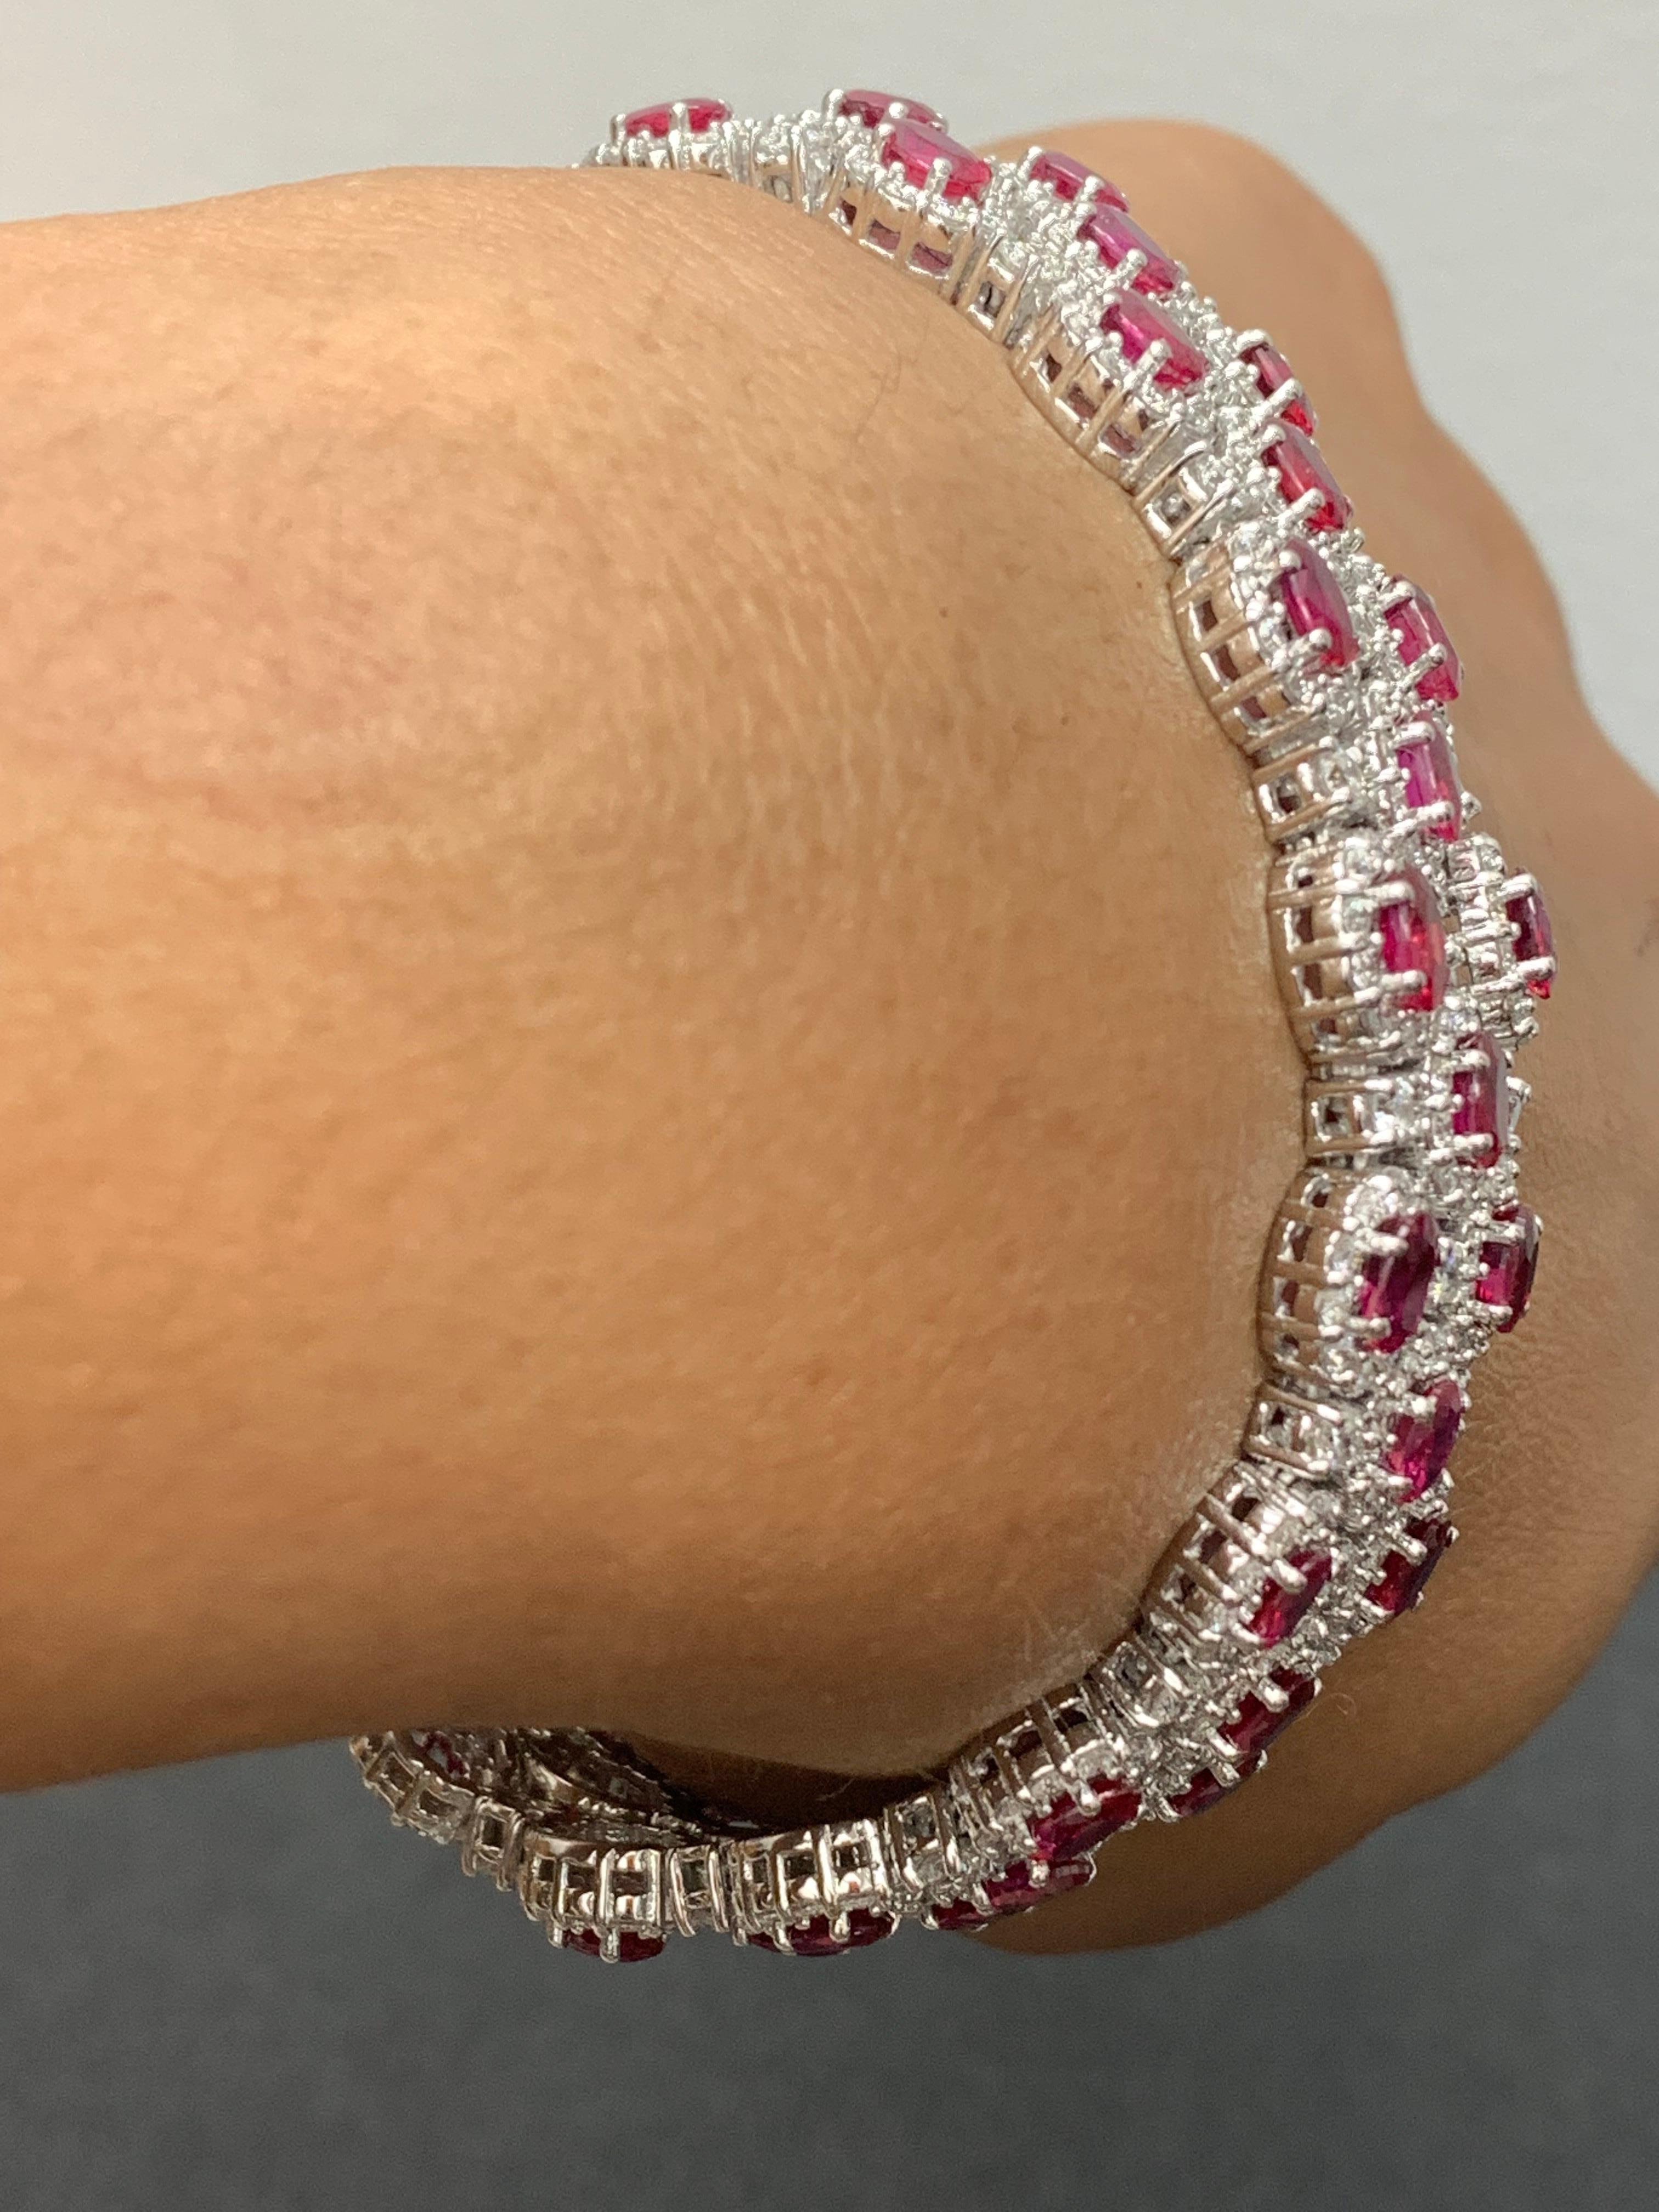 14.91 Carat Oval Cut Ruby and Diamond 3 Row Bracelet in 14K White Gold For Sale 1